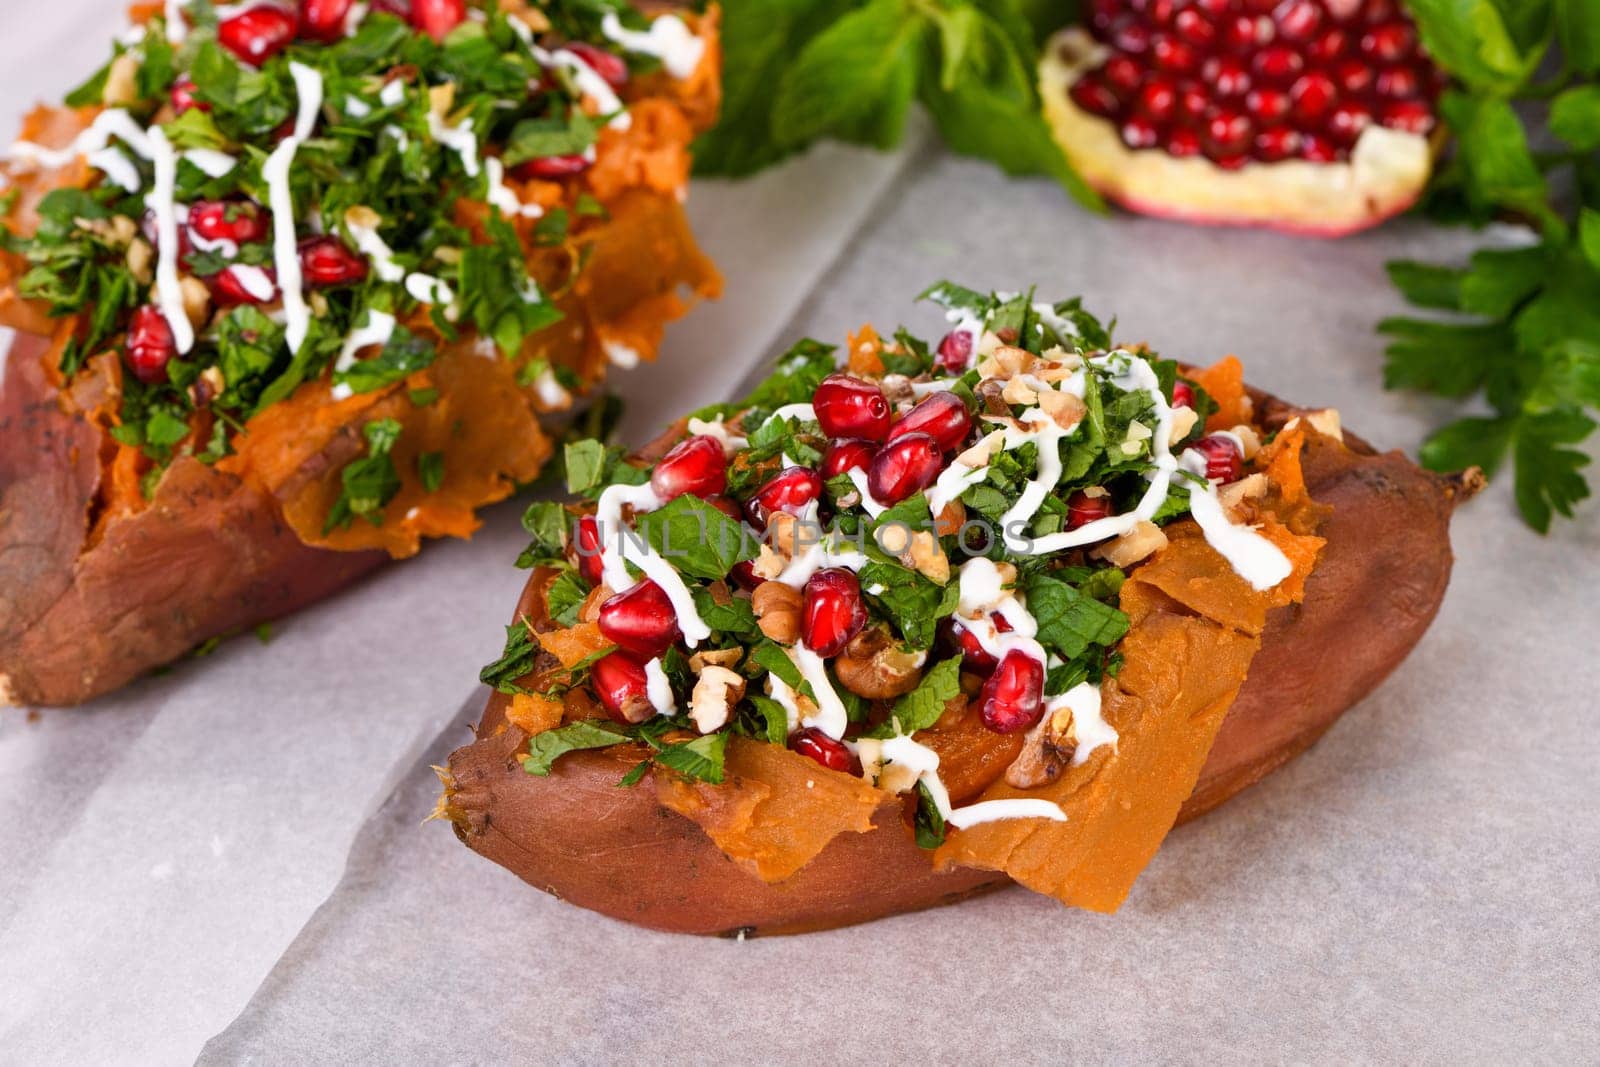 Baked stuffed sweet potatoes by Apolonia